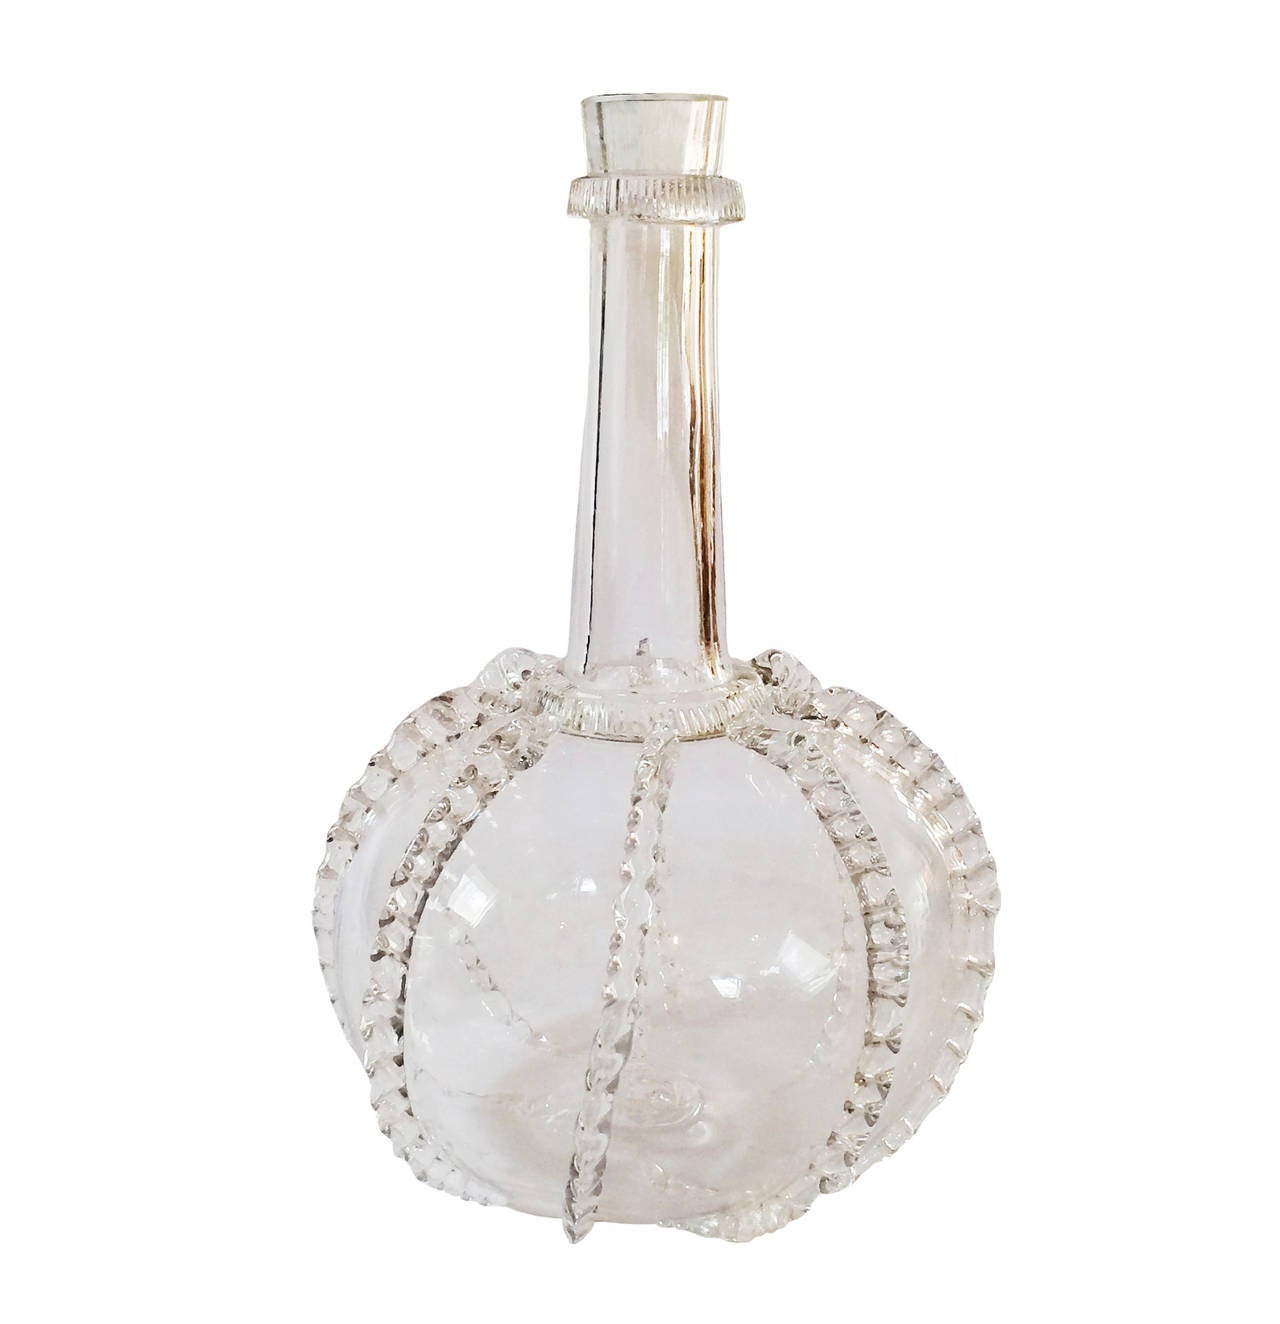 Handblown Dutch glass decanter with vertical ribbed beading; 18th century.